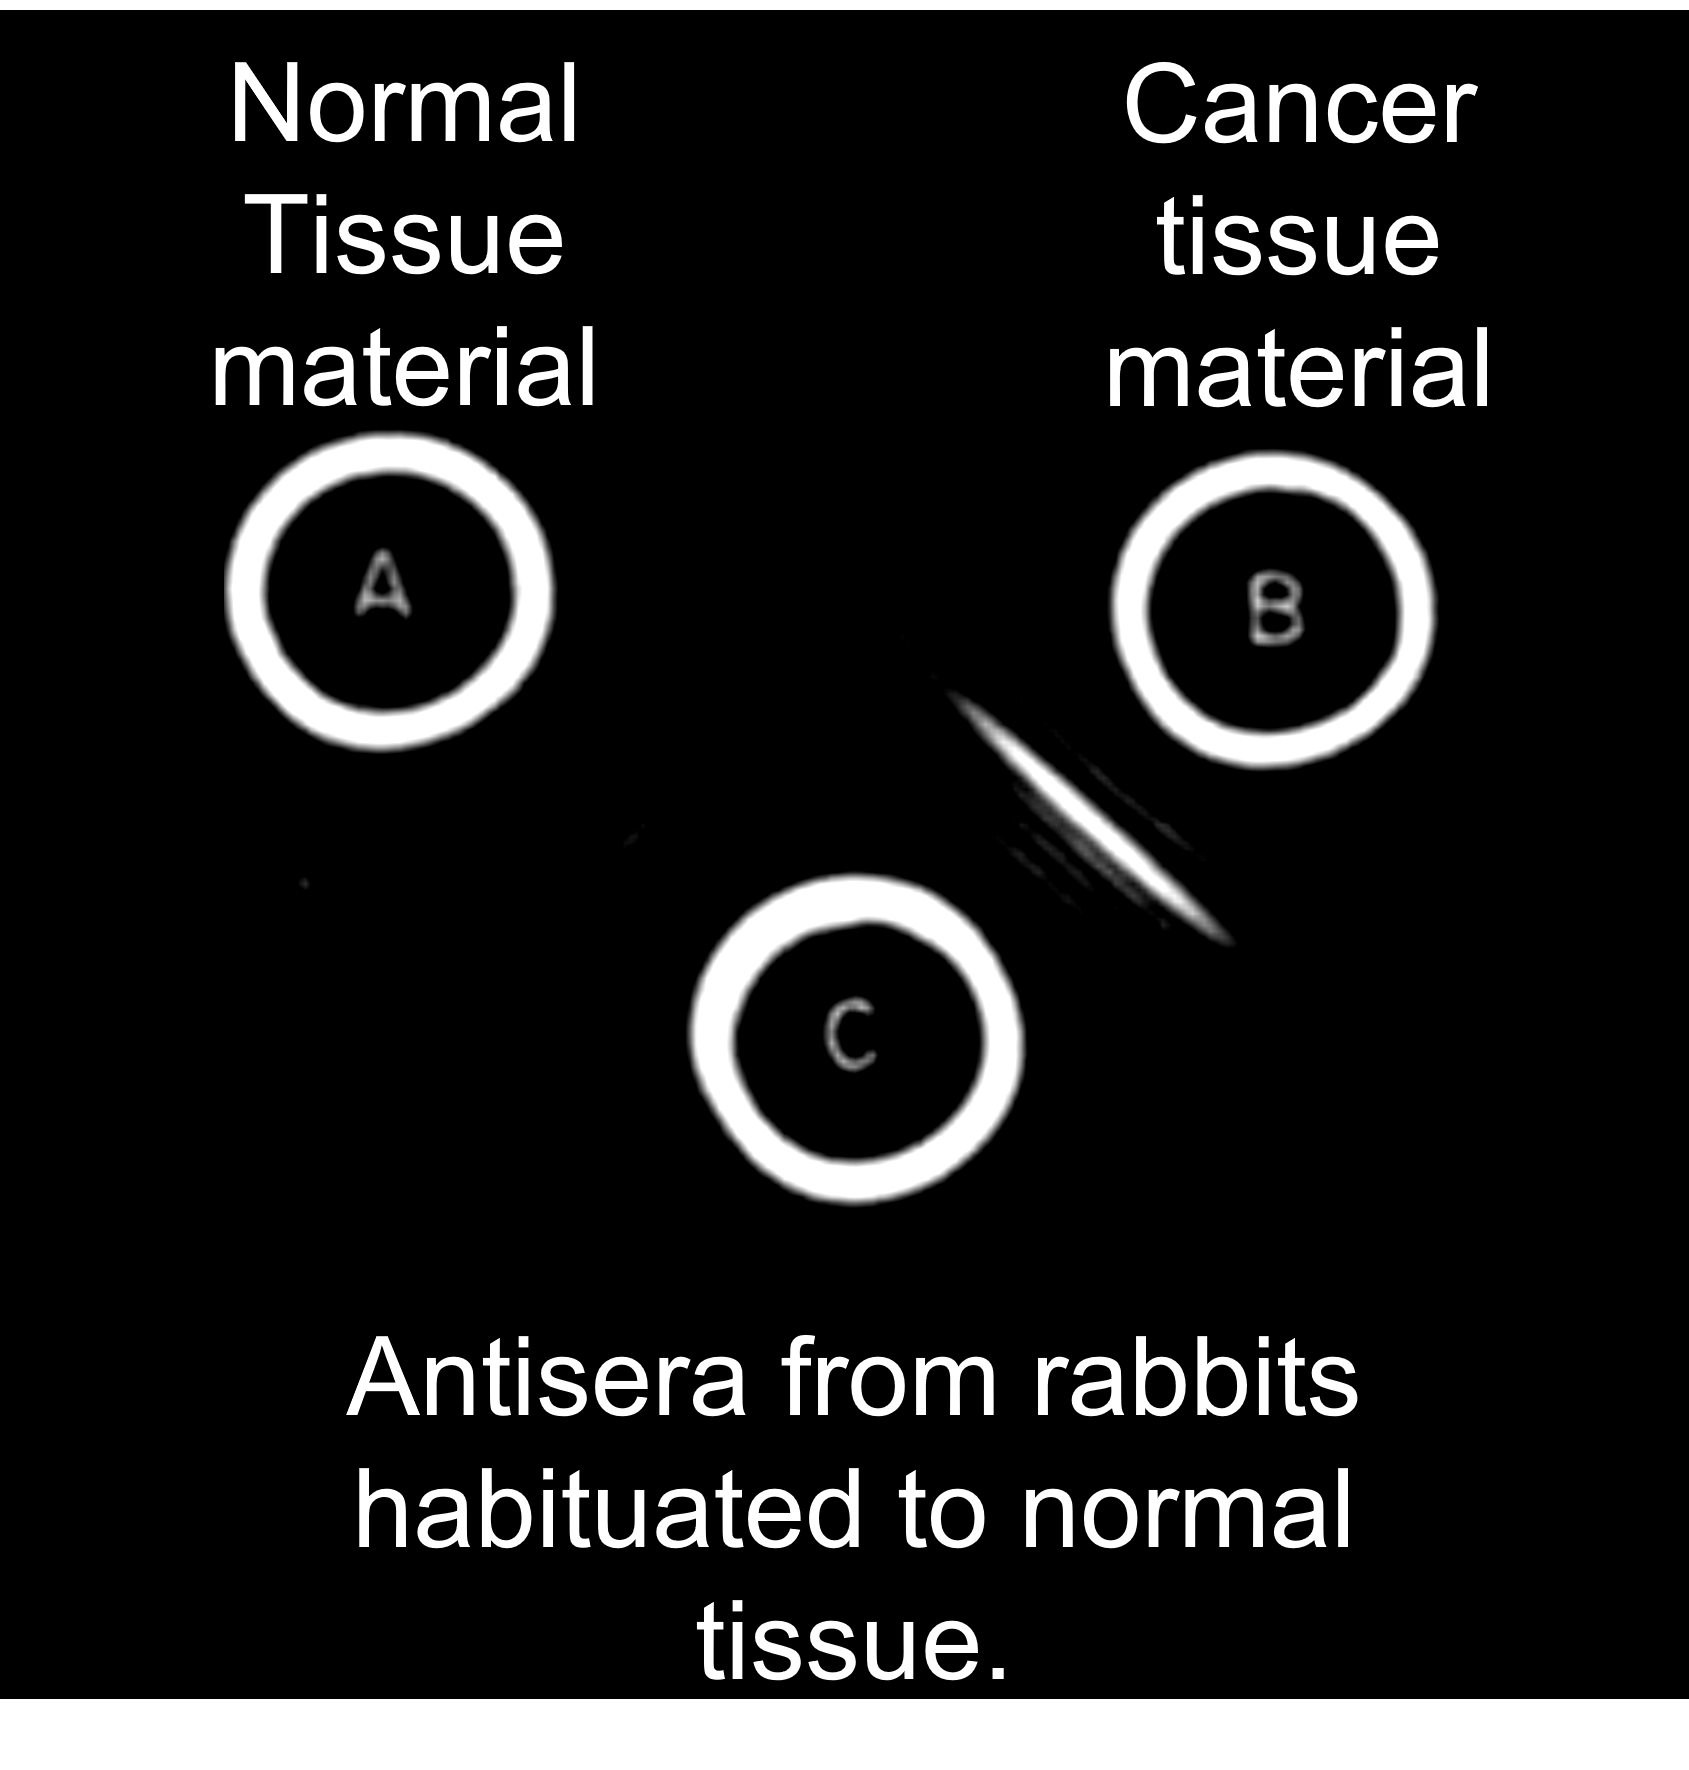 Dr. Phil Gold' 1965 experiment showing that Antisera of rabbit habituated to normal tissue reacts with the colorectal cancer material (B) but not with the normal tissue material, as shown by a band